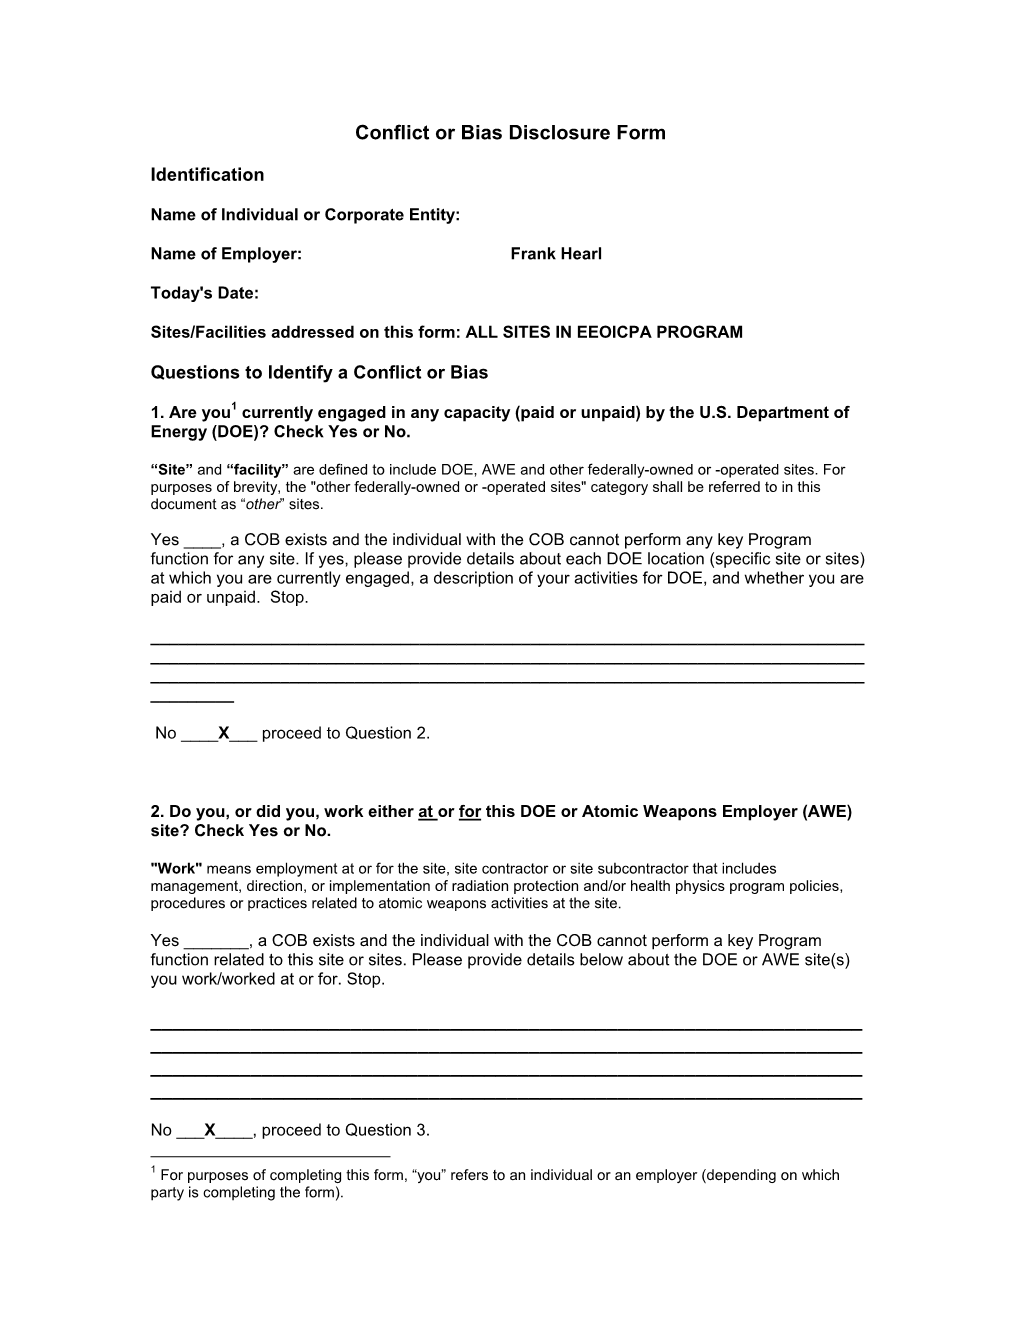 Non-Conflicted COB Disclosure Form Pdf Icon[54 KB (12 Pages)]